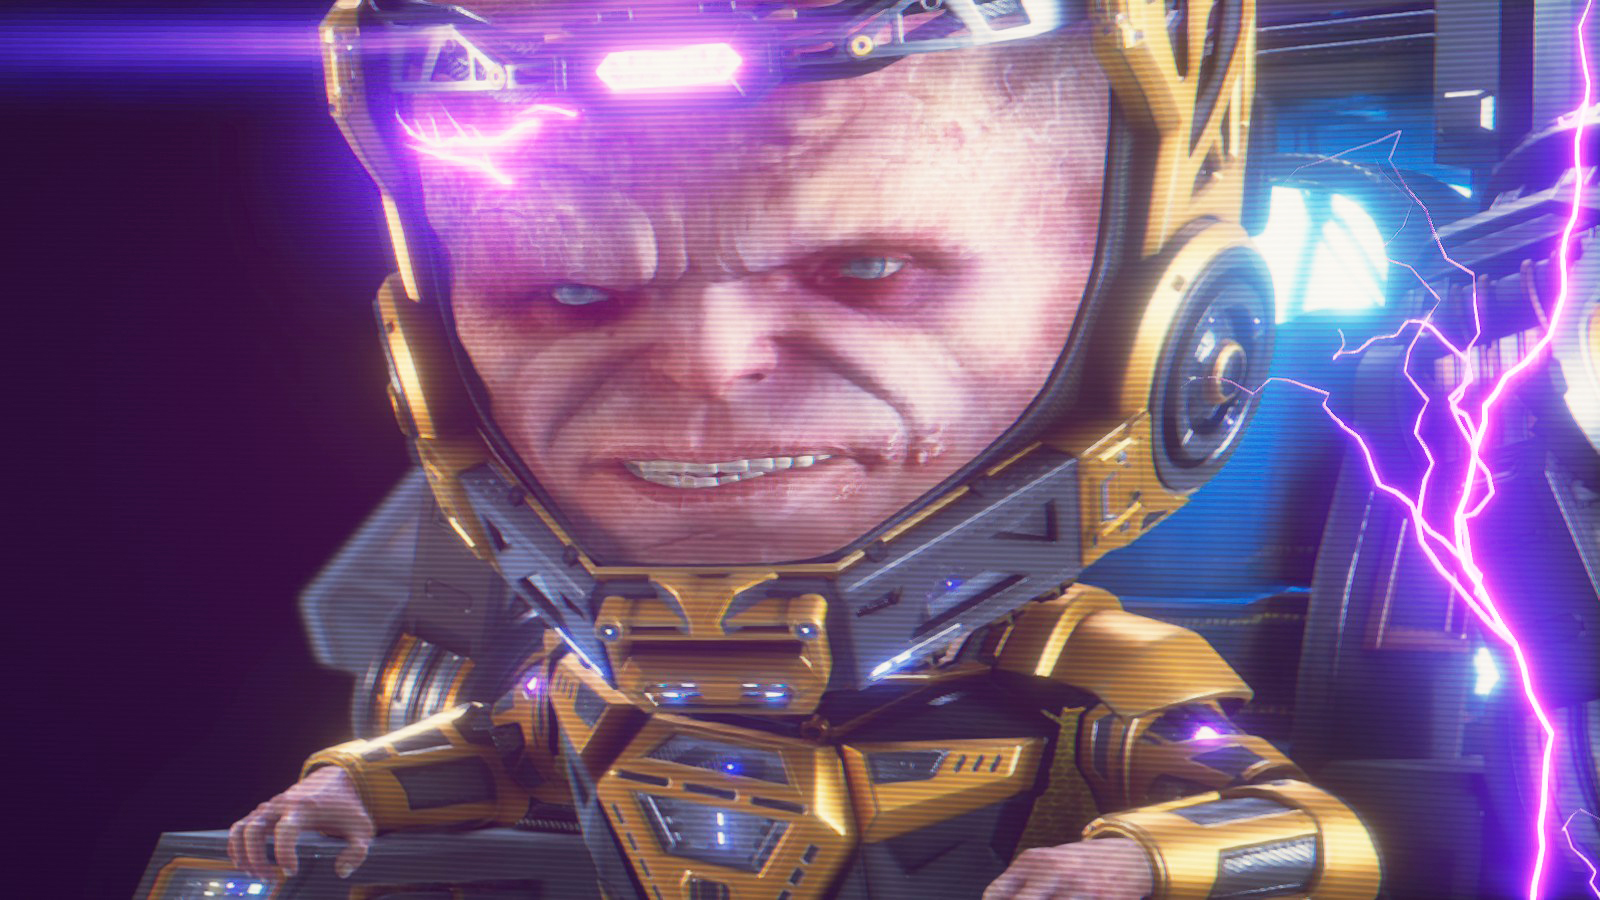 IGN - One of Marvel's wildest and most maniacal villains, MODOK, will make  his debut in Ant-Man and the Wasp: Quantumania. Read more on the giant  floating head on site.